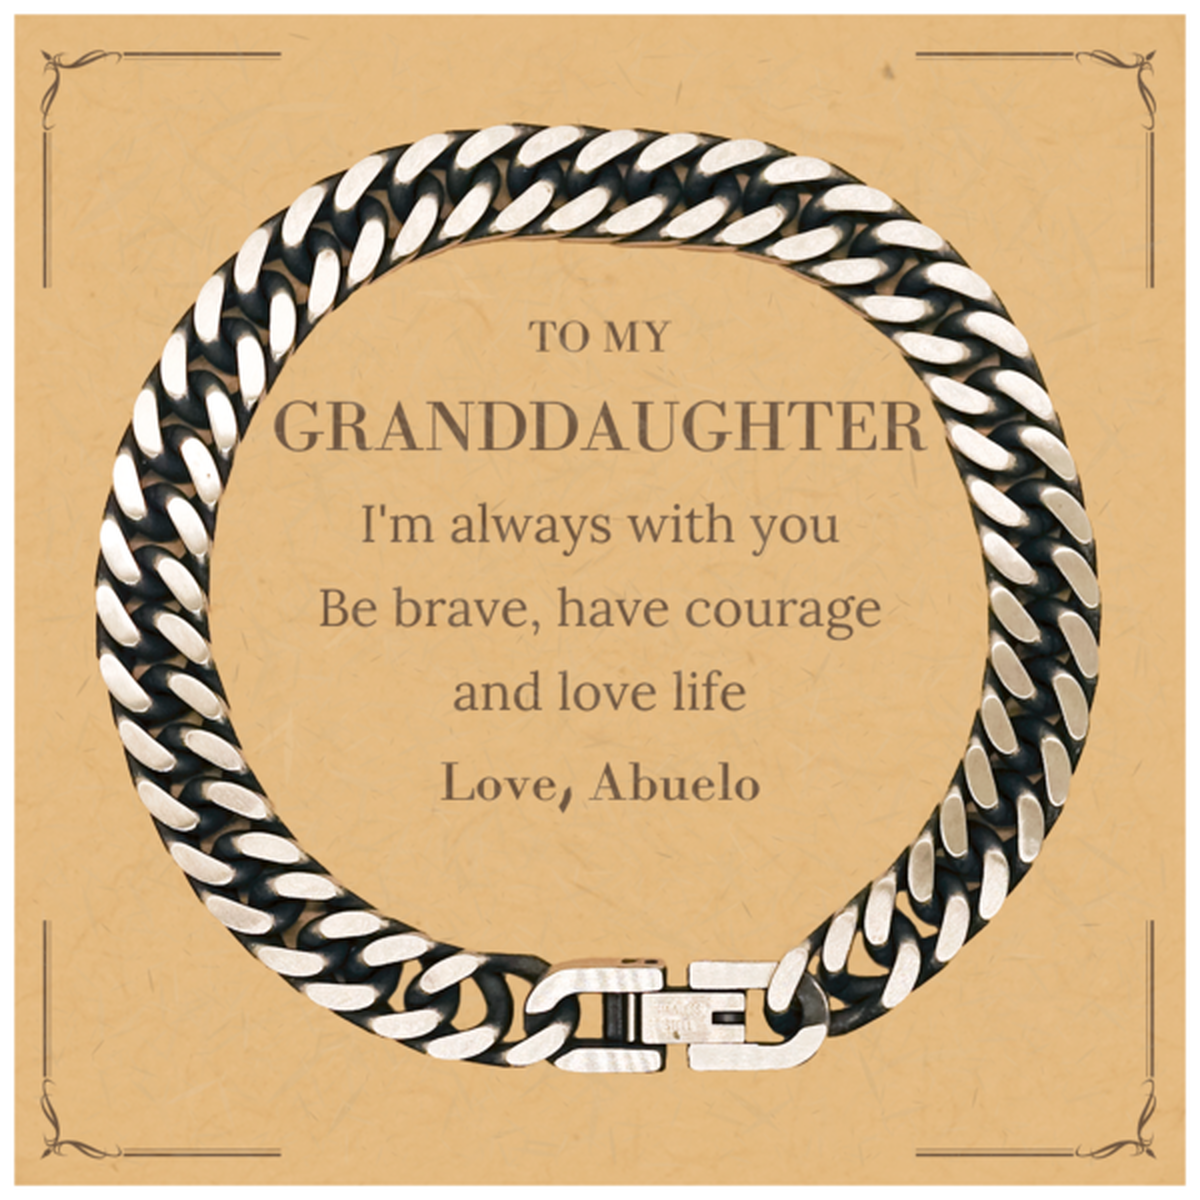 To My Granddaughter Gifts from Abuelo, Unique Cuban Link Chain Bracelet Inspirational Christmas Birthday Graduation Gifts for Granddaughter I'm always with you. Be brave, have courage and love life. Love, Abuelo